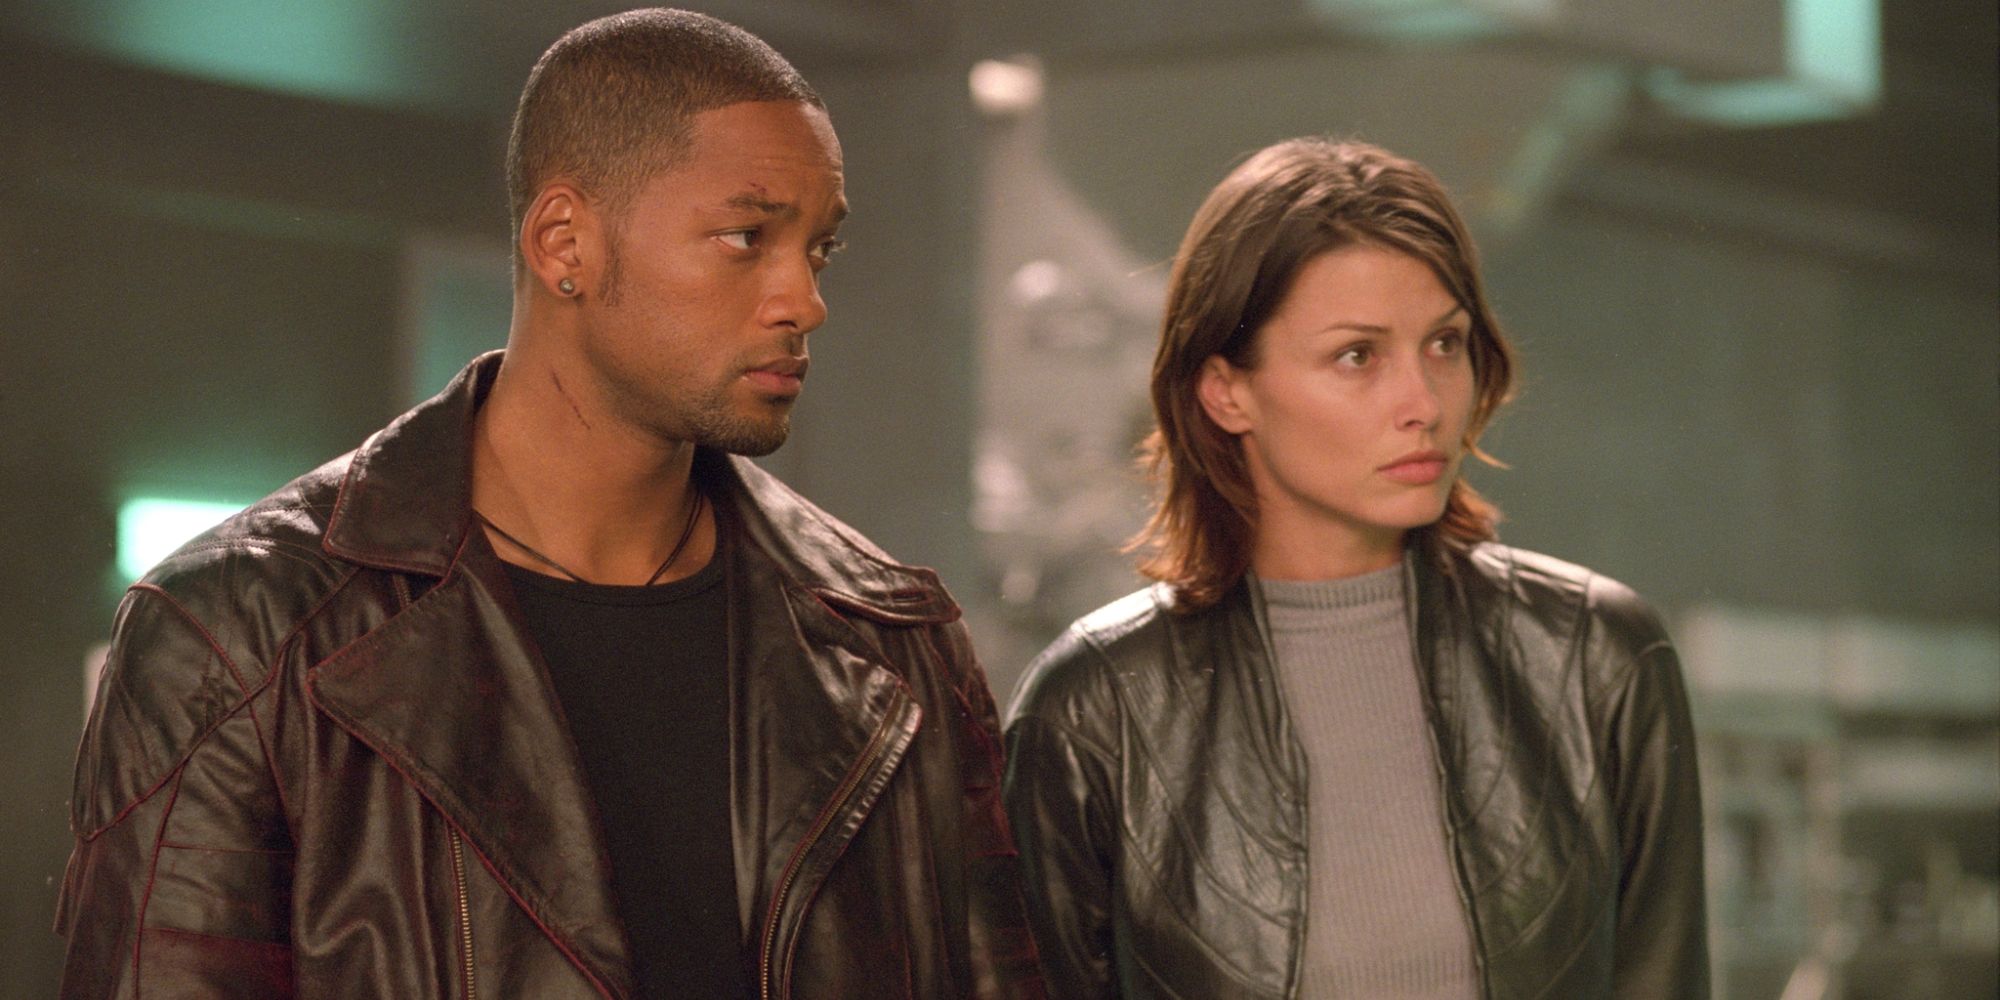 Will Smith and Bridget Moynahan in 'I, Robot'